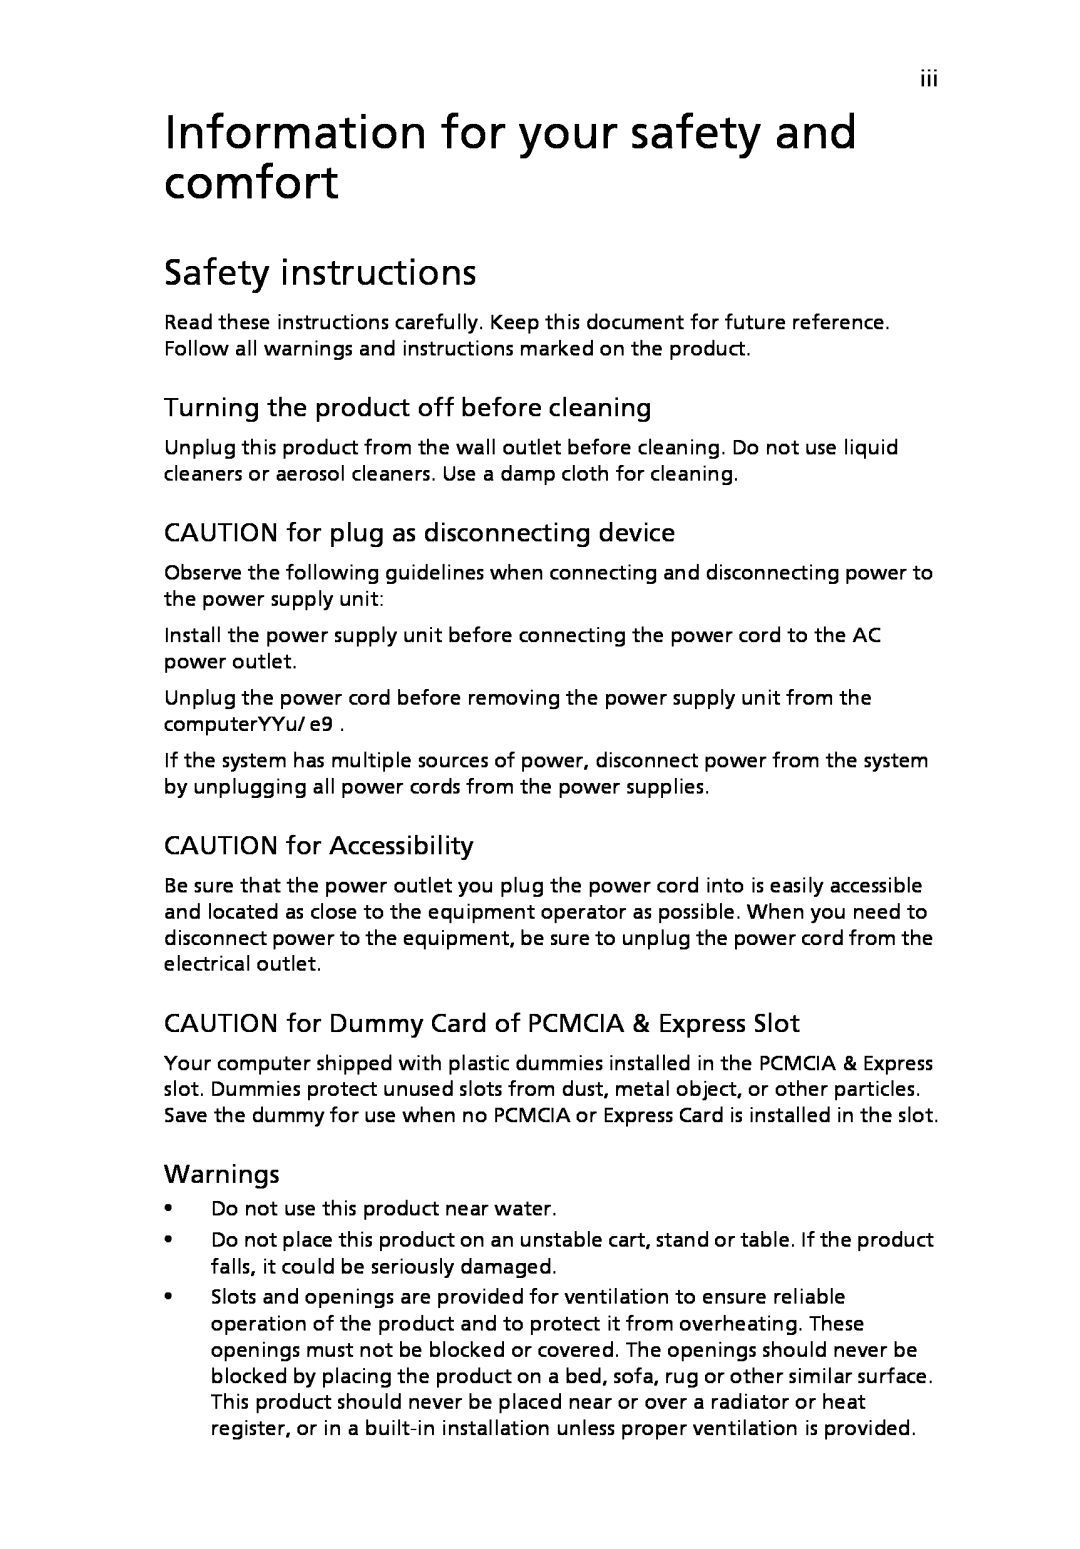 Acer 3040 Series Information for your safety and comfort, Safety instructions, Turning the product off before cleaning 